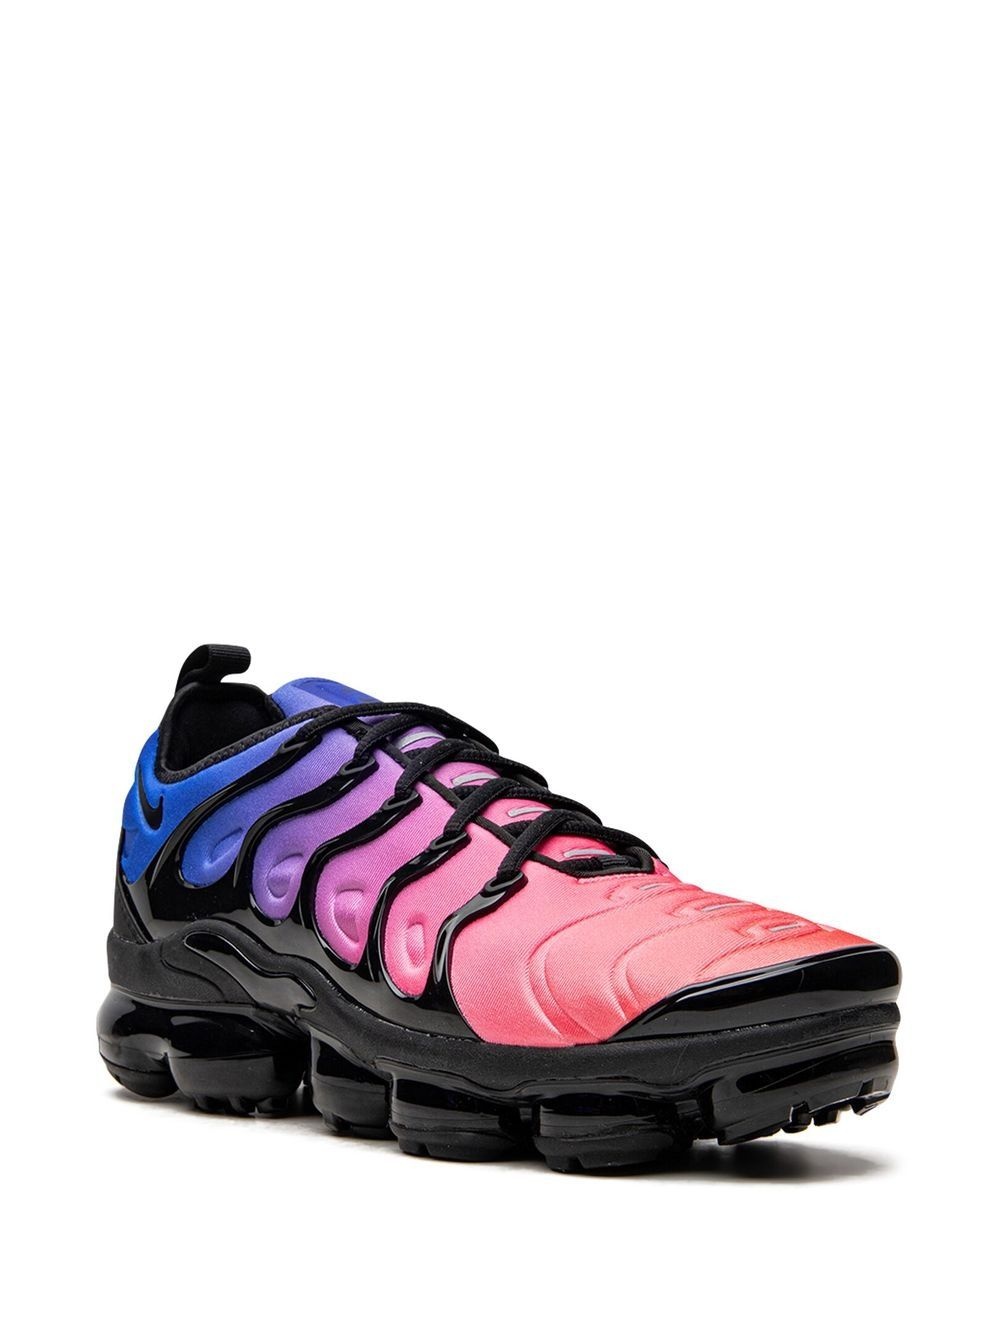 Air Vapormax Plus "Cotton Candy" sneakers - 2